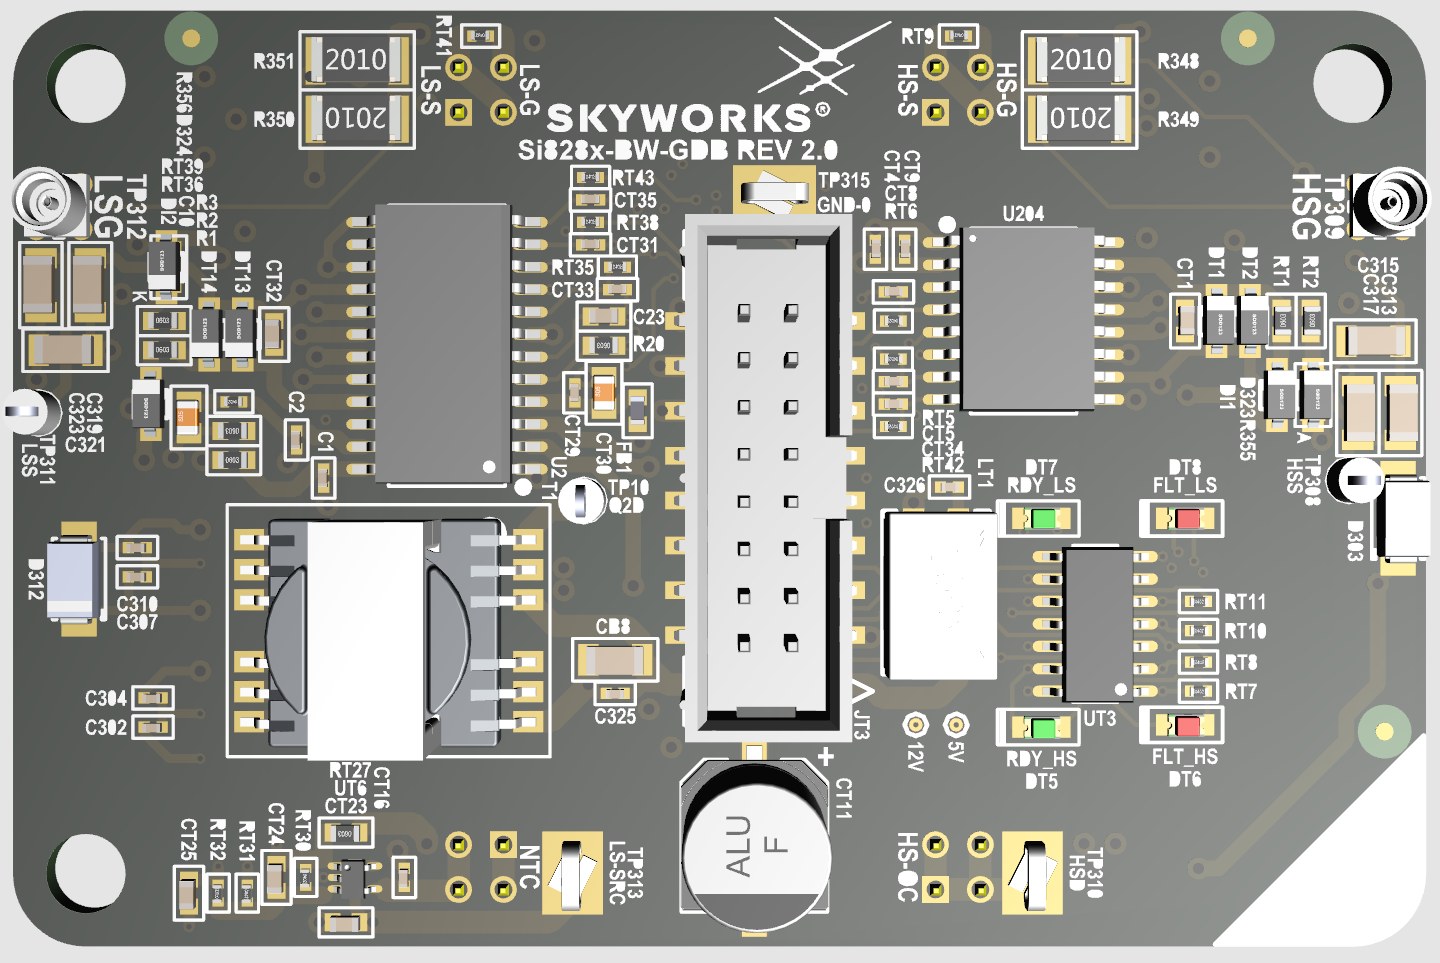 Skyworks’ Si828x gate driver board designed to work with Wolfspeed’s 1700 V XM3 SiC FET. Image used courtesy of Skyworks